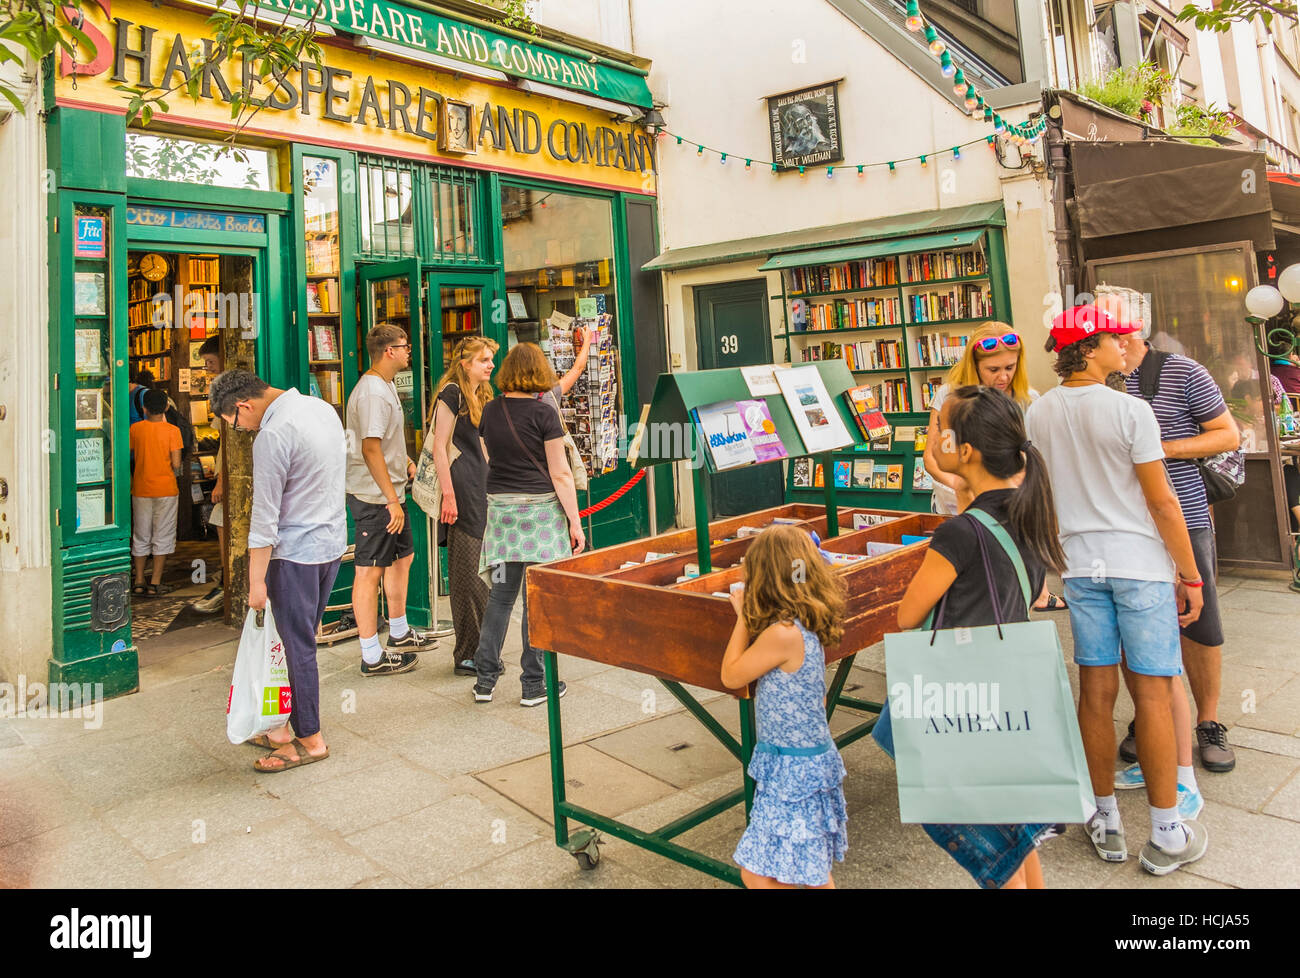 shakespeare and company bookstore, outside view Stock Photo